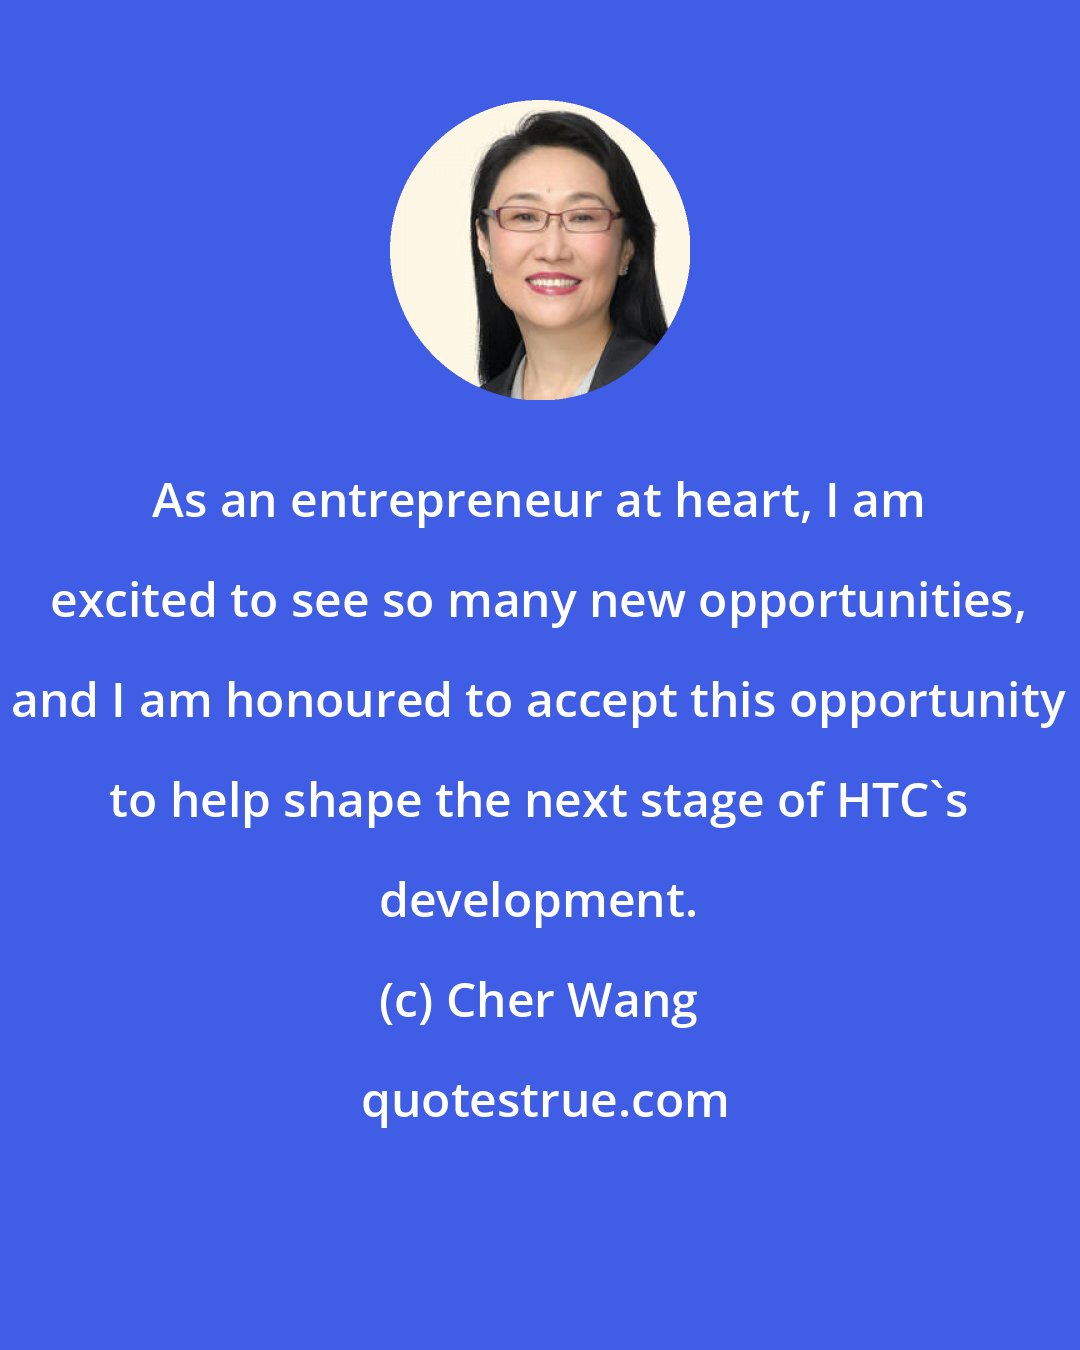 Cher Wang: As an entrepreneur at heart, I am excited to see so many new opportunities, and I am honoured to accept this opportunity to help shape the next stage of HTC's development.